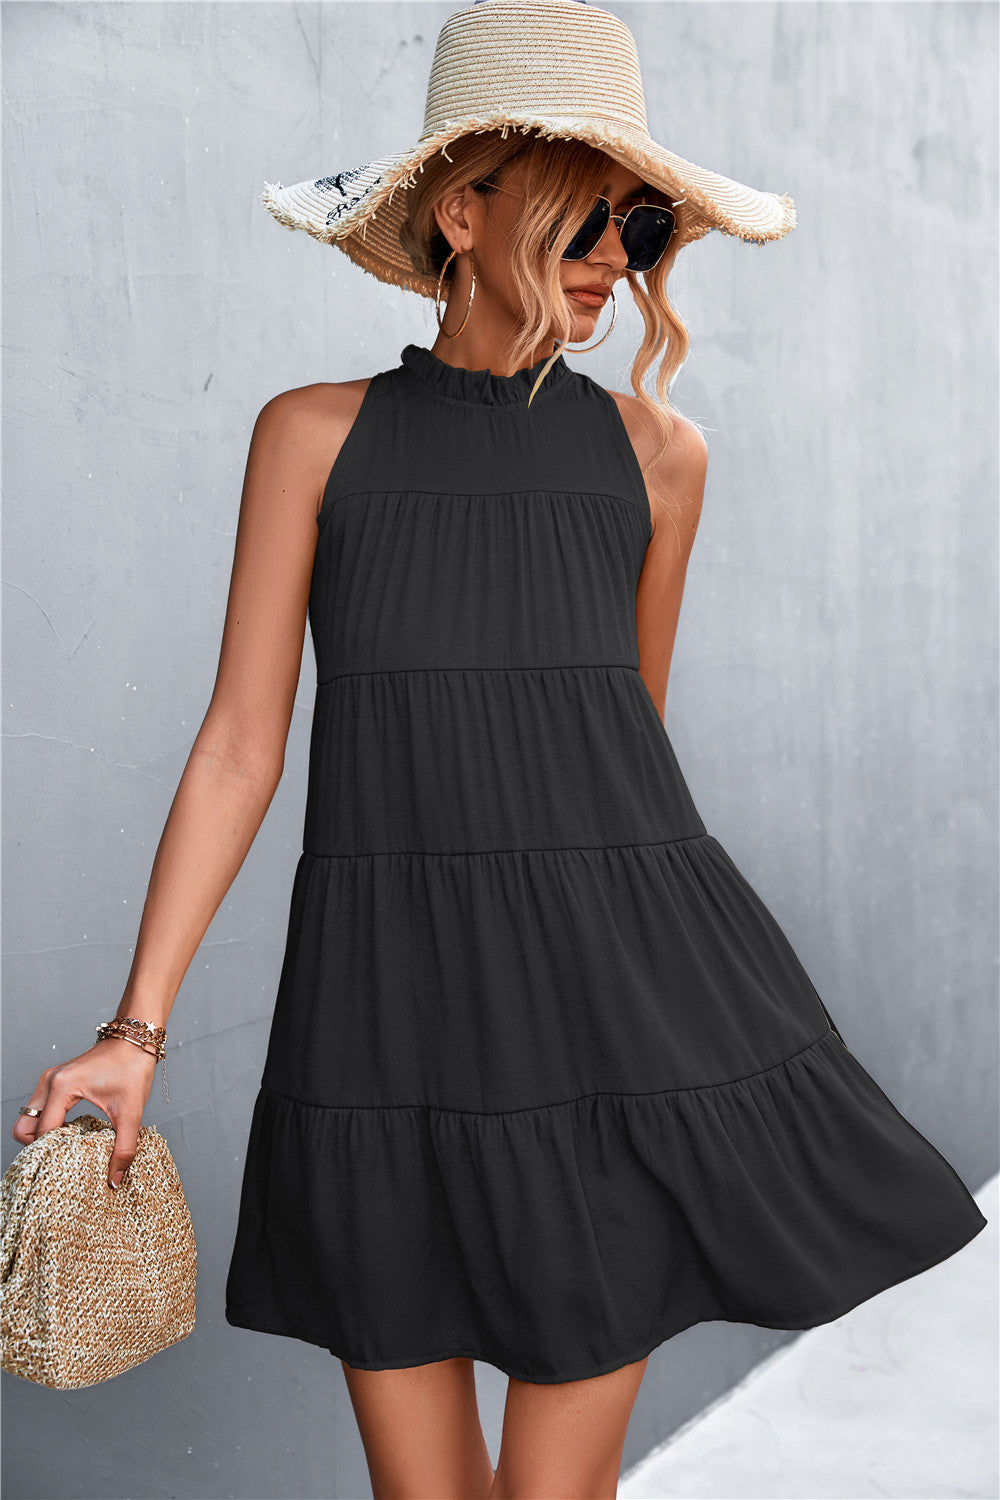 Women's maxi dresses, summer dresses, dresses for all occasions. 